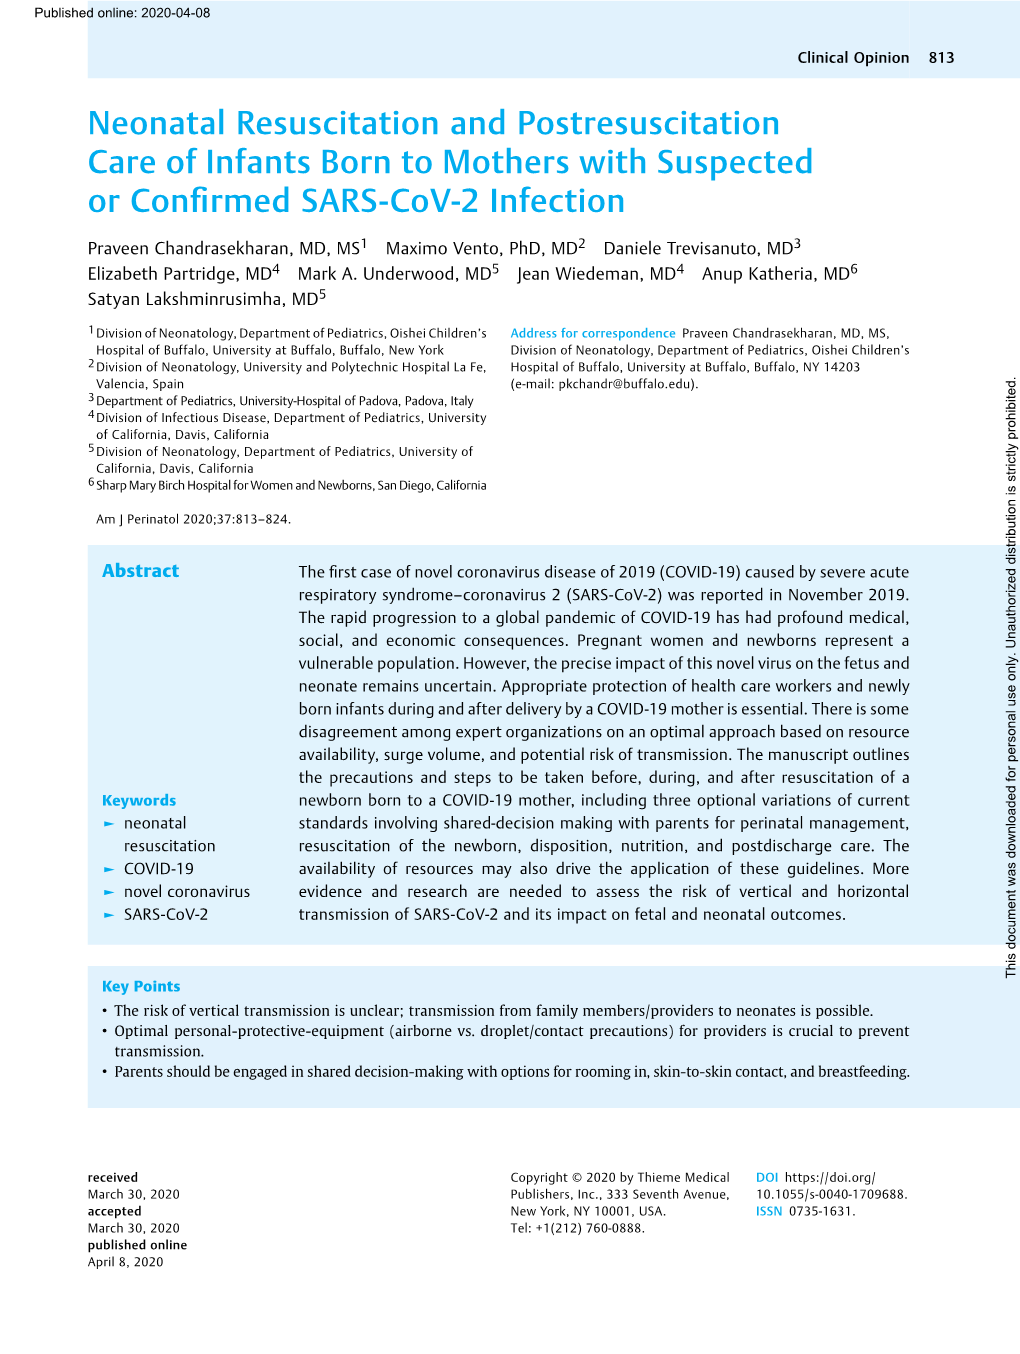 Neonatal Resuscitation and Postresuscitation Care of Infants Born to Mothers with Suspected Or Conﬁrmed SARS-Cov-2 Infection